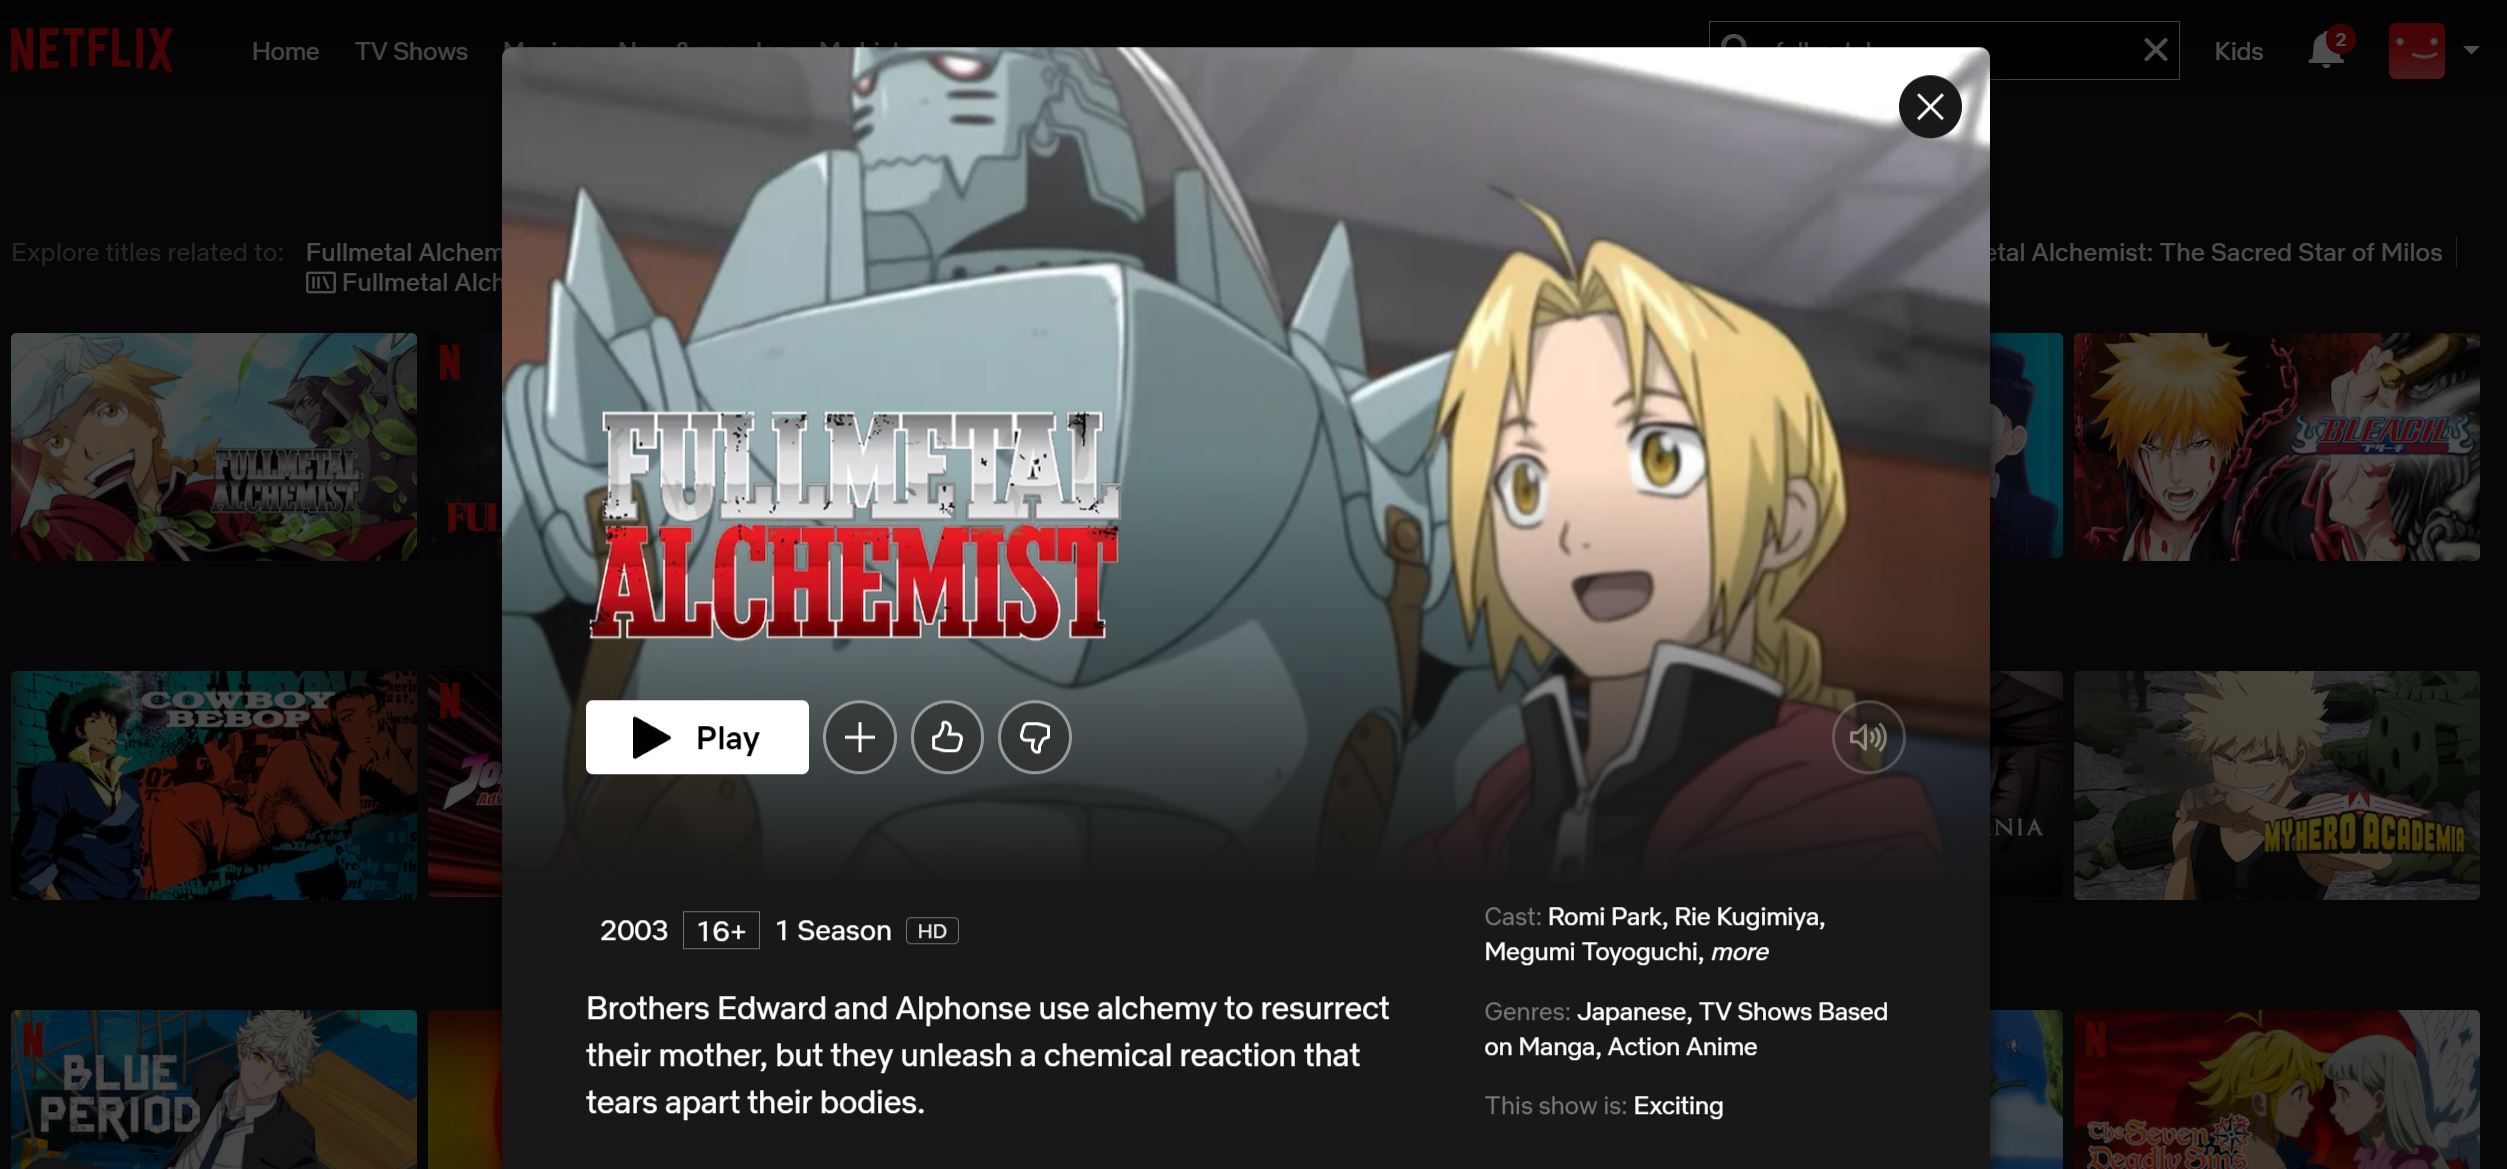 How To Watch Fullmetal Alchemist On Netflix In 2023 (Tested)